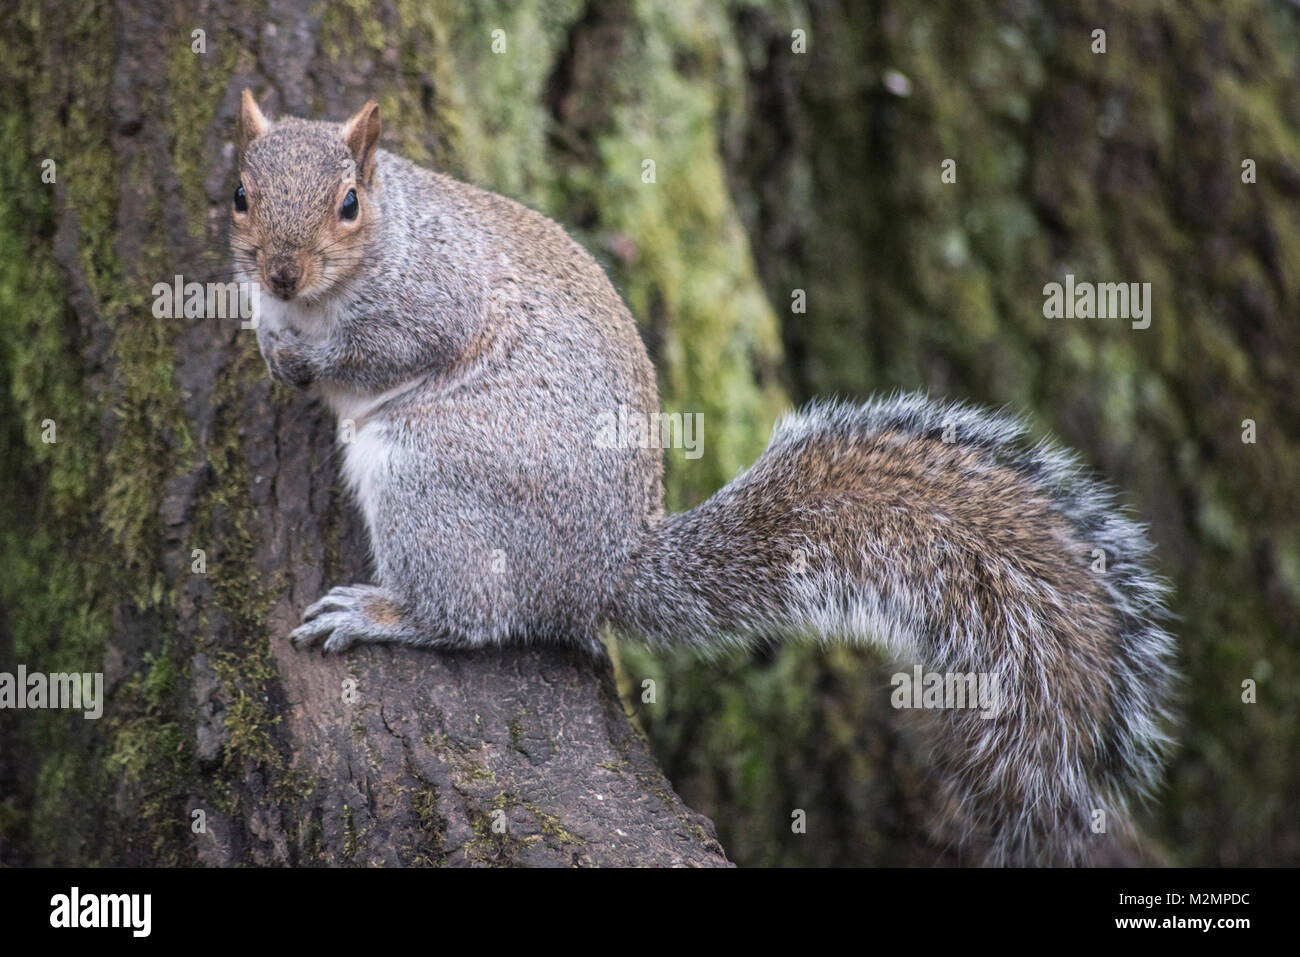 ROATH PARK, CARDIFF, UK. 17th January 2018. A squirrel perches on the base of a tree and looks cheekily into the lens in Roath Park in Cardiff. Squirr Stock Photo